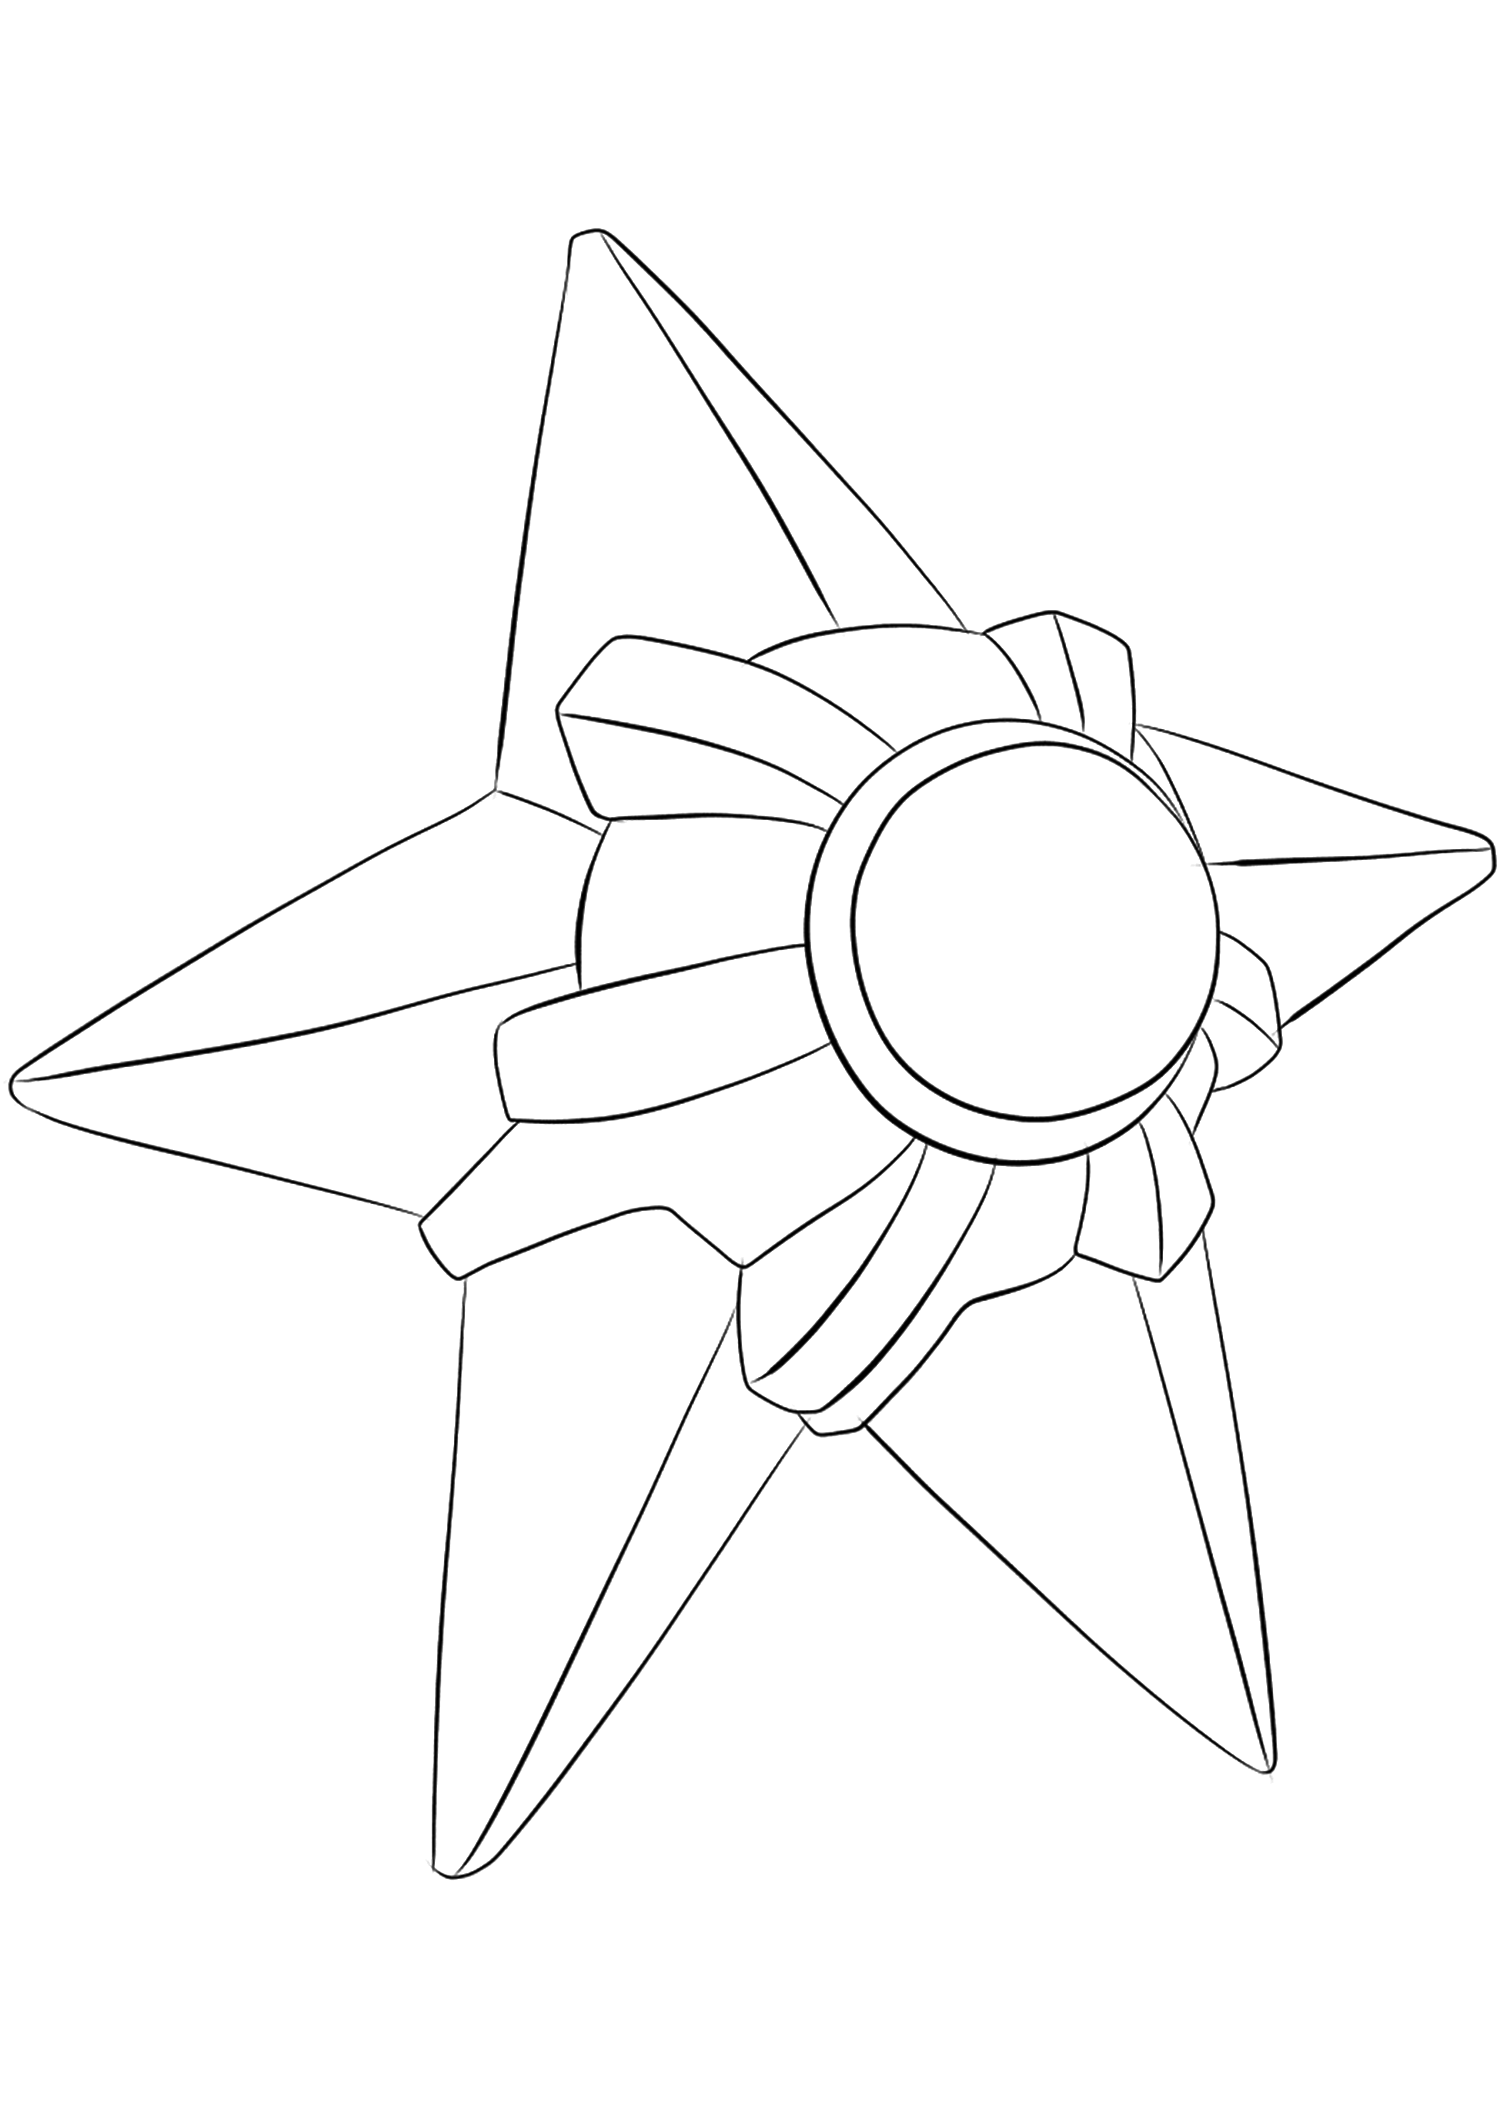 Staryu (No.120). Staryu Coloring page, Generation I Pokemon of type WaterOriginal image credit: Pokemon linearts by Lilly Gerbil on Deviantart.Permission:  All rights reserved © Pokemon company and Ken Sugimori.